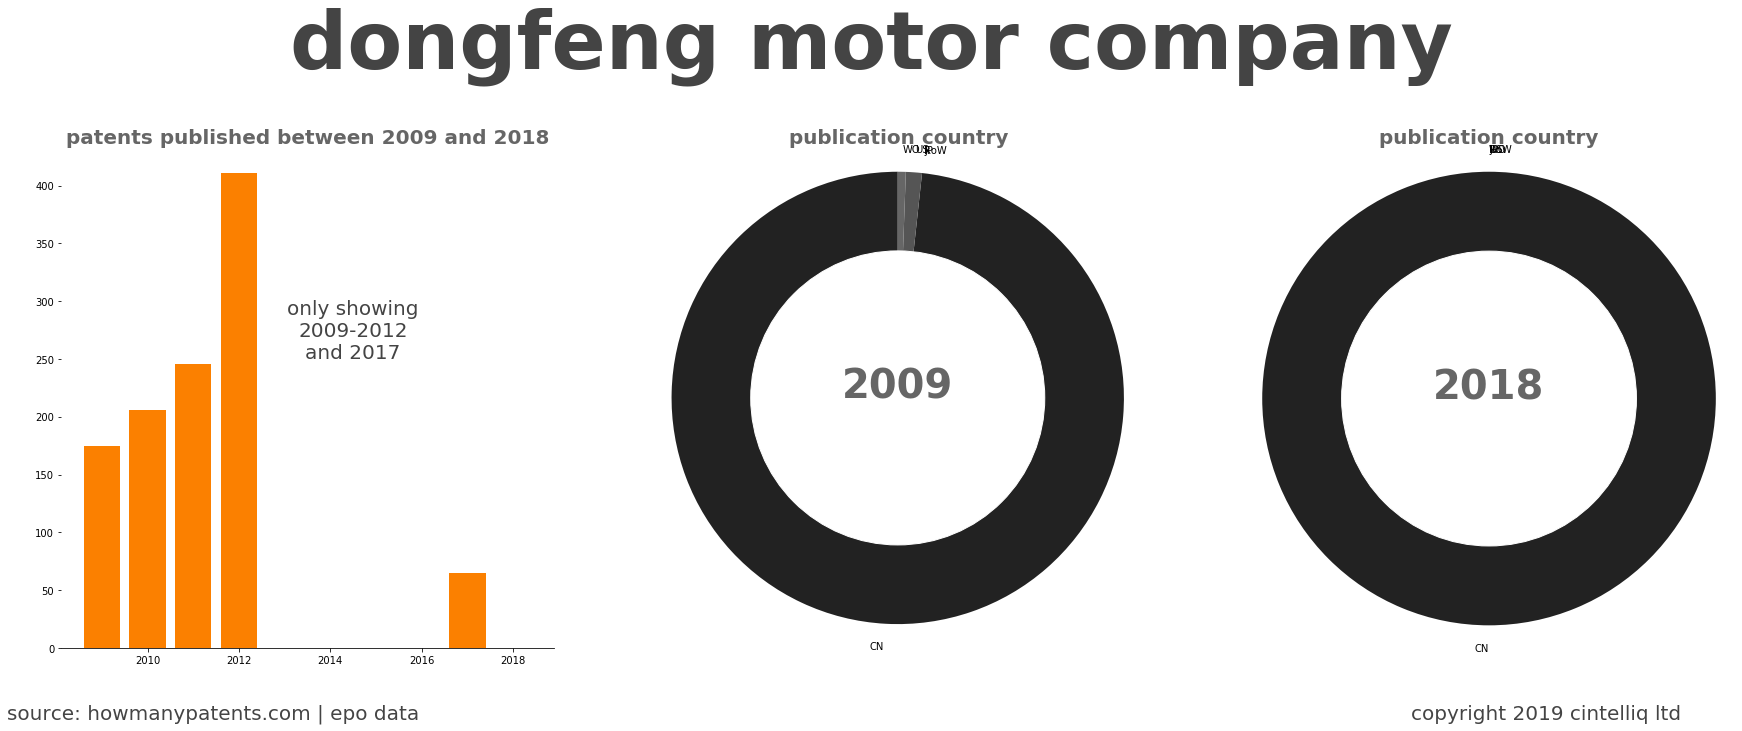 summary of patents for Dongfeng Motor Company